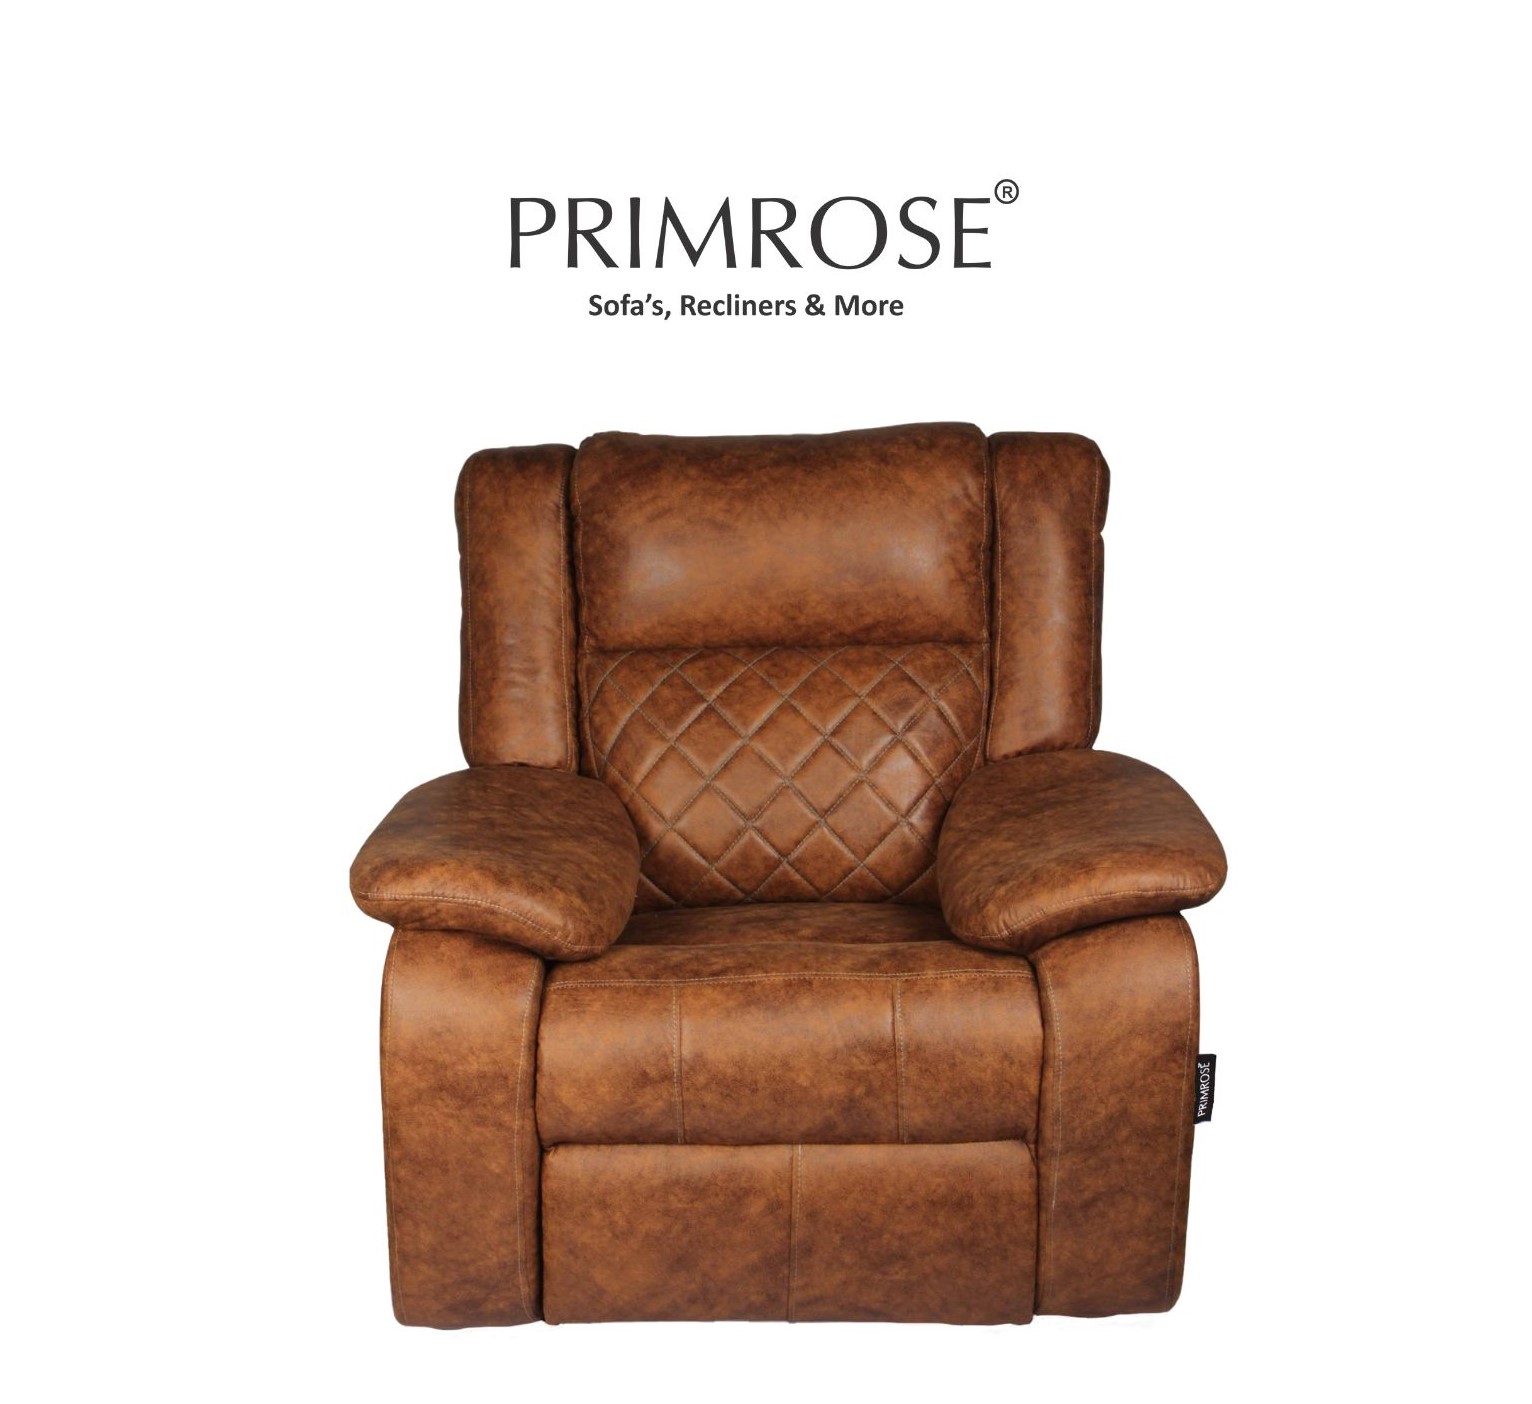 Primrose Recliner Christie Single Seater Manual Recliner, ER Fabric, Contemporary Look & Design, Color–Brown I Just Layback And Relax I Improve Your Gaming